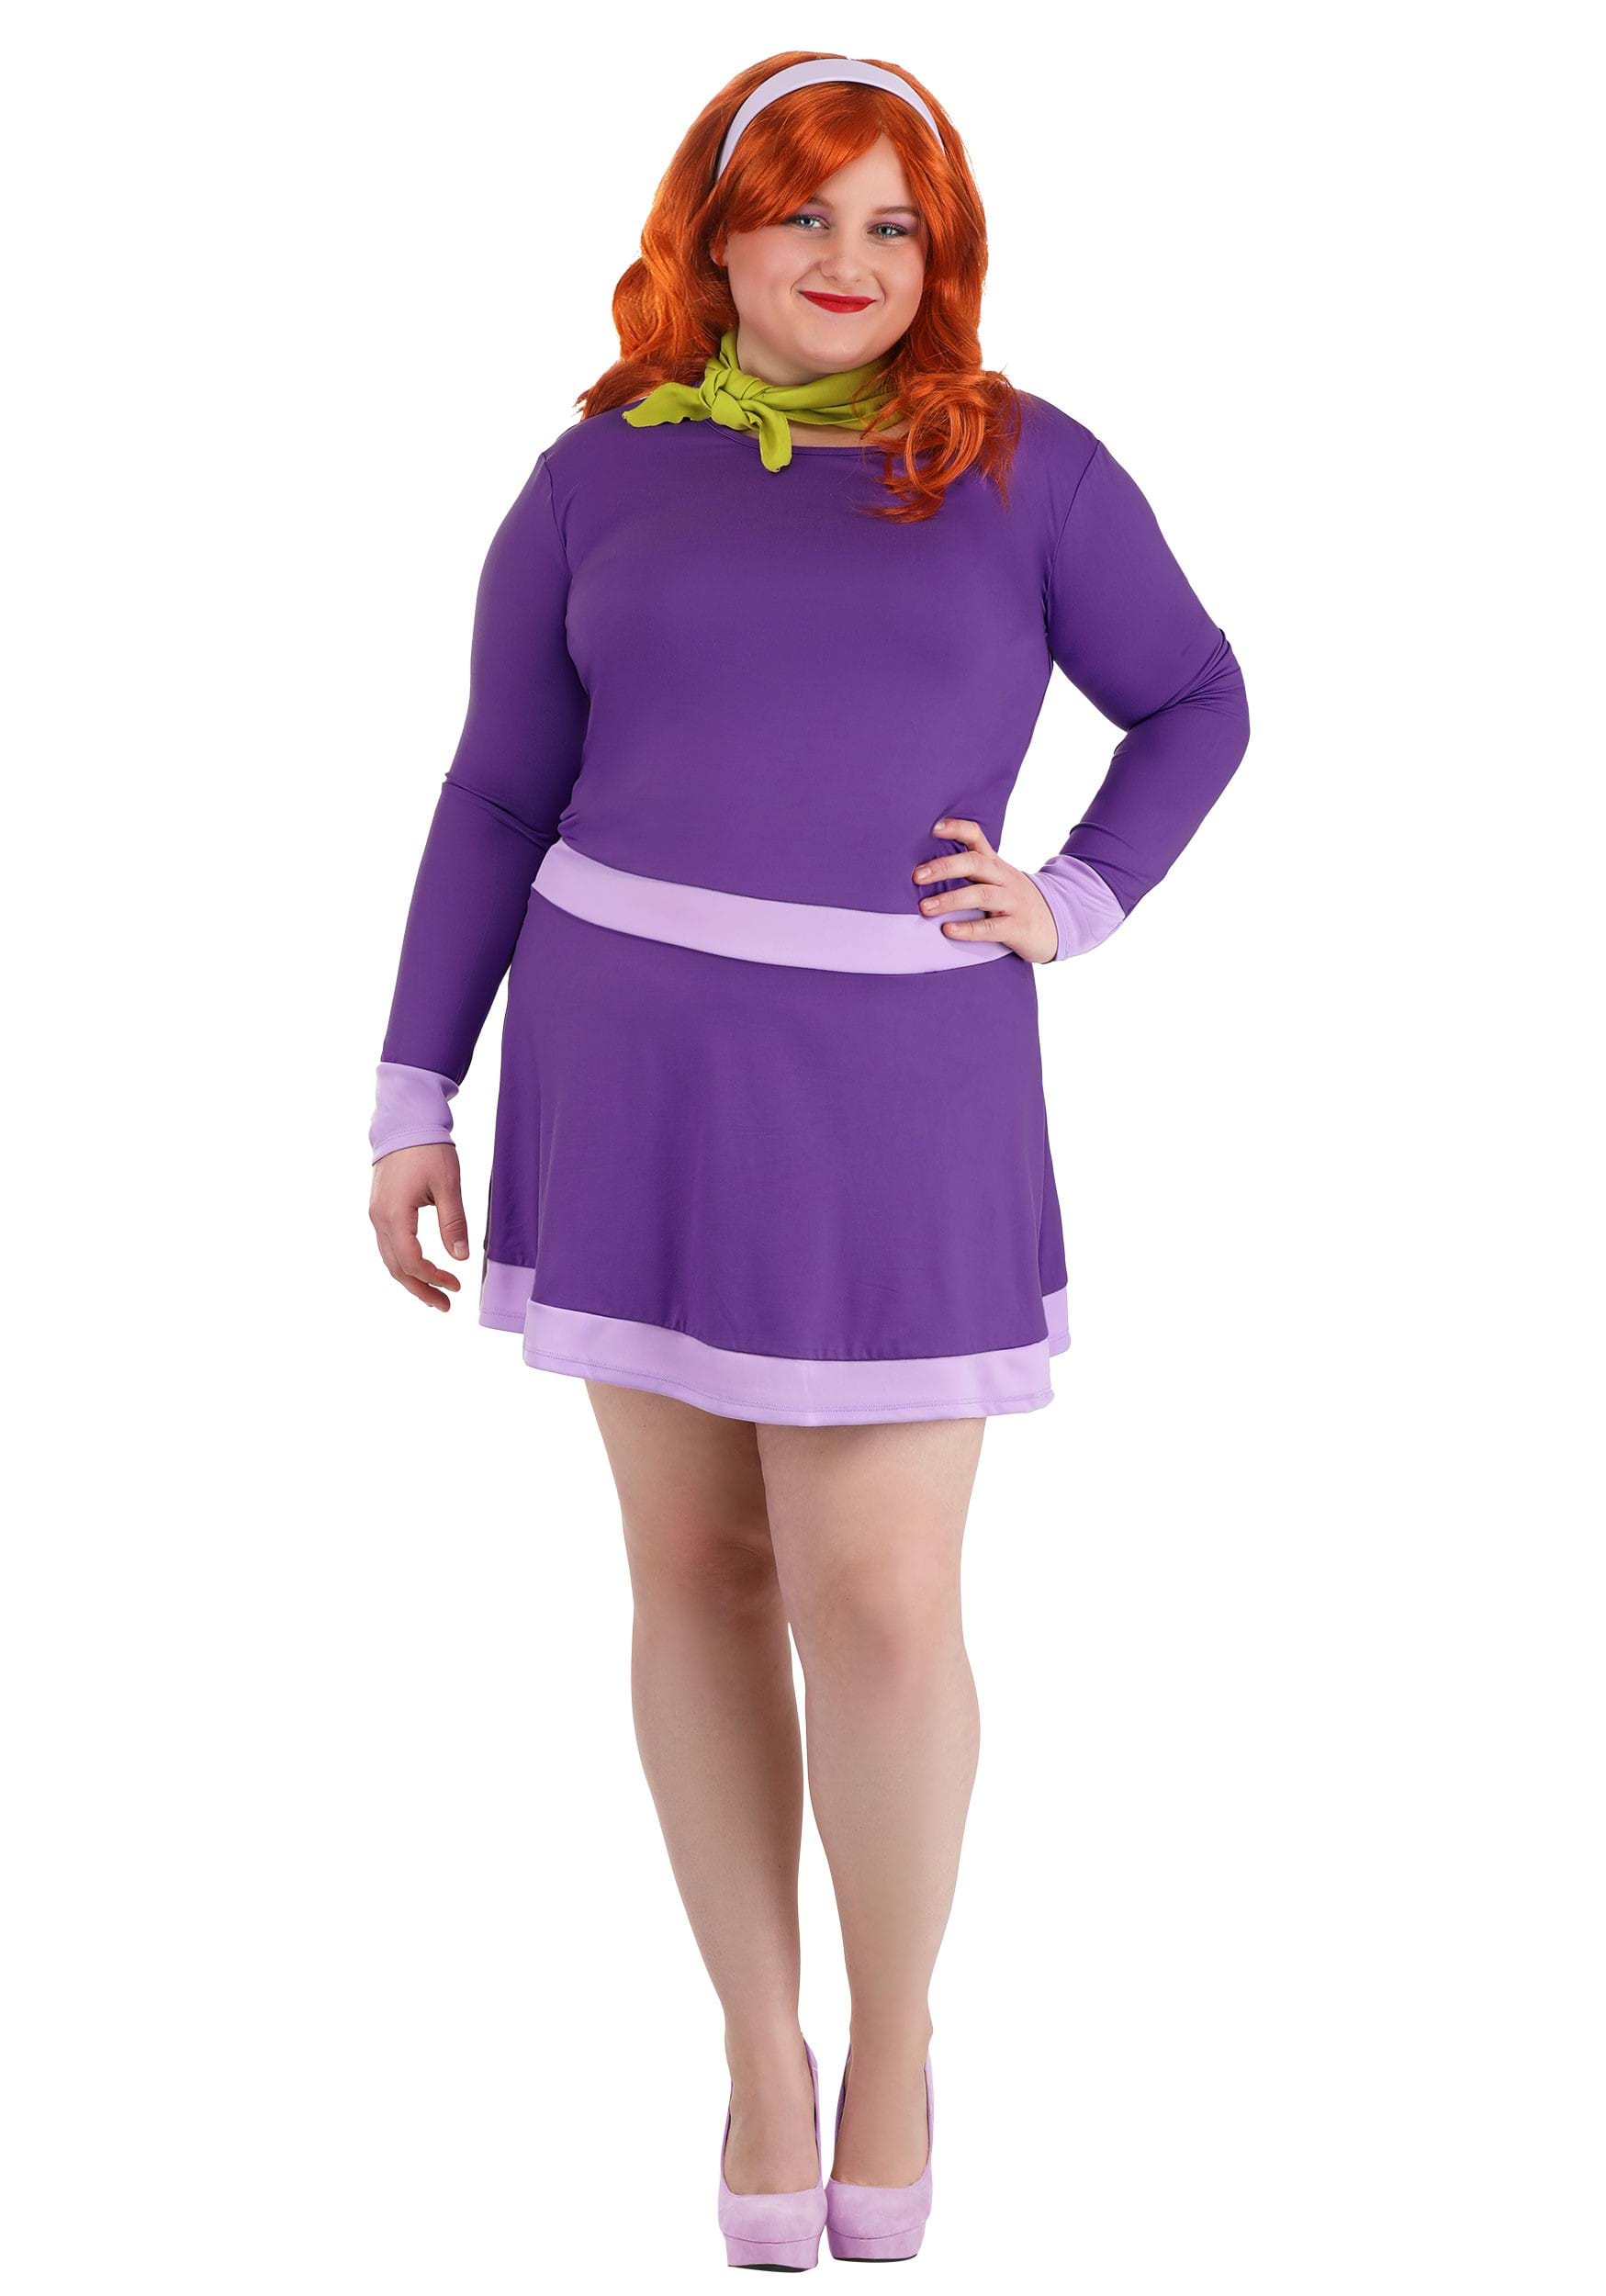 Photos - Fancy Dress Jerry Leigh Plus Size Scooby Doo Daphne Costume for Women Green/Purple